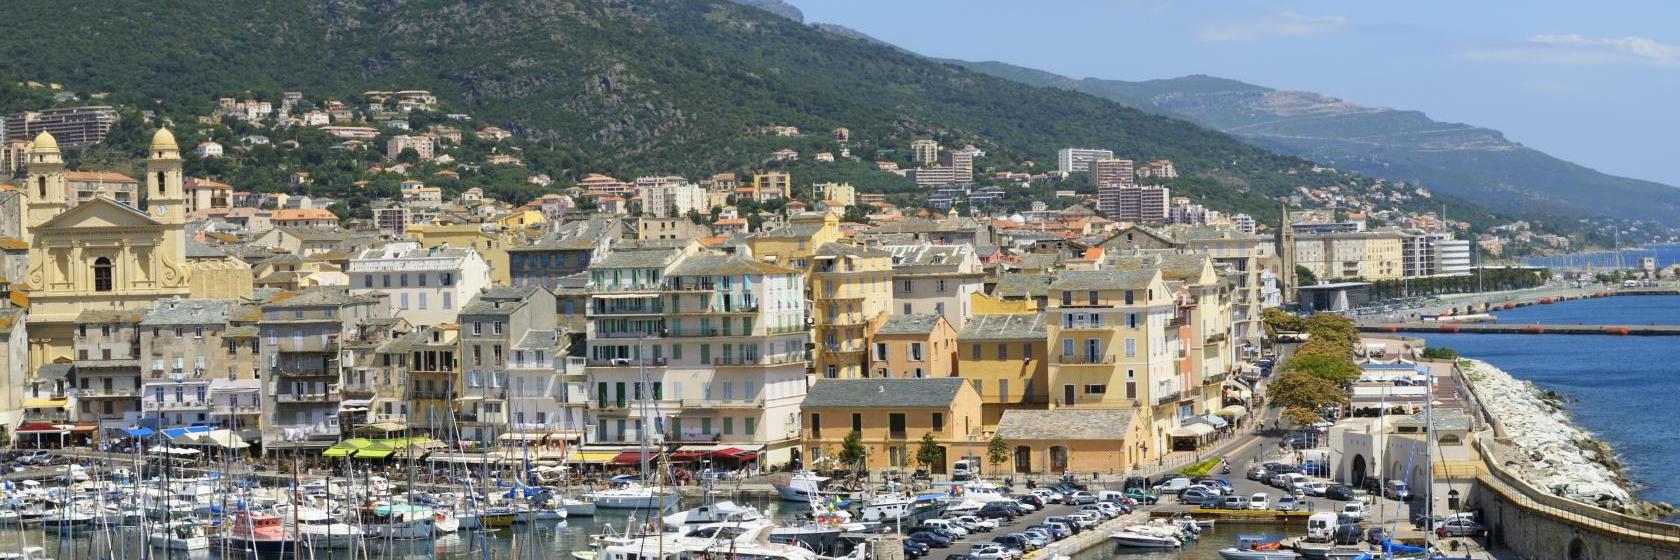 10 Best Bastia Hotels, France (From $53)